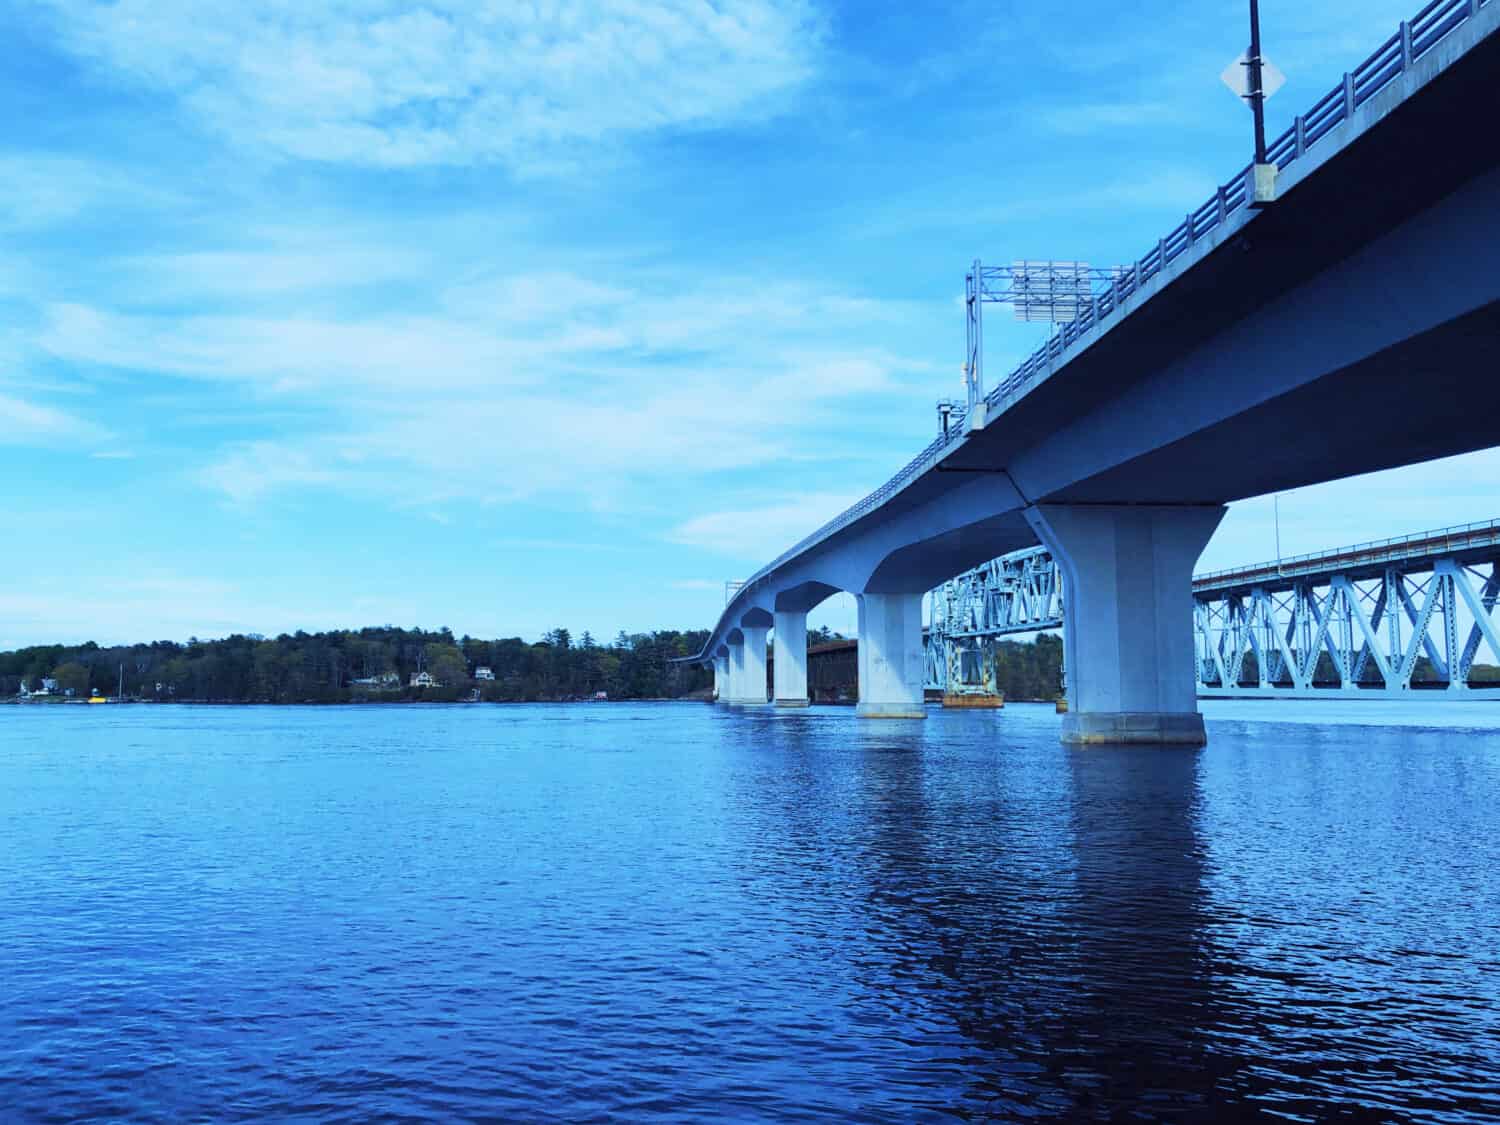 The Sagadahoc Bridge and The Carlton Bridge between the City of Bath and the town of Woolwich, Maine, carrying U.S. Route 1 (US 1) over the Kennebec River.